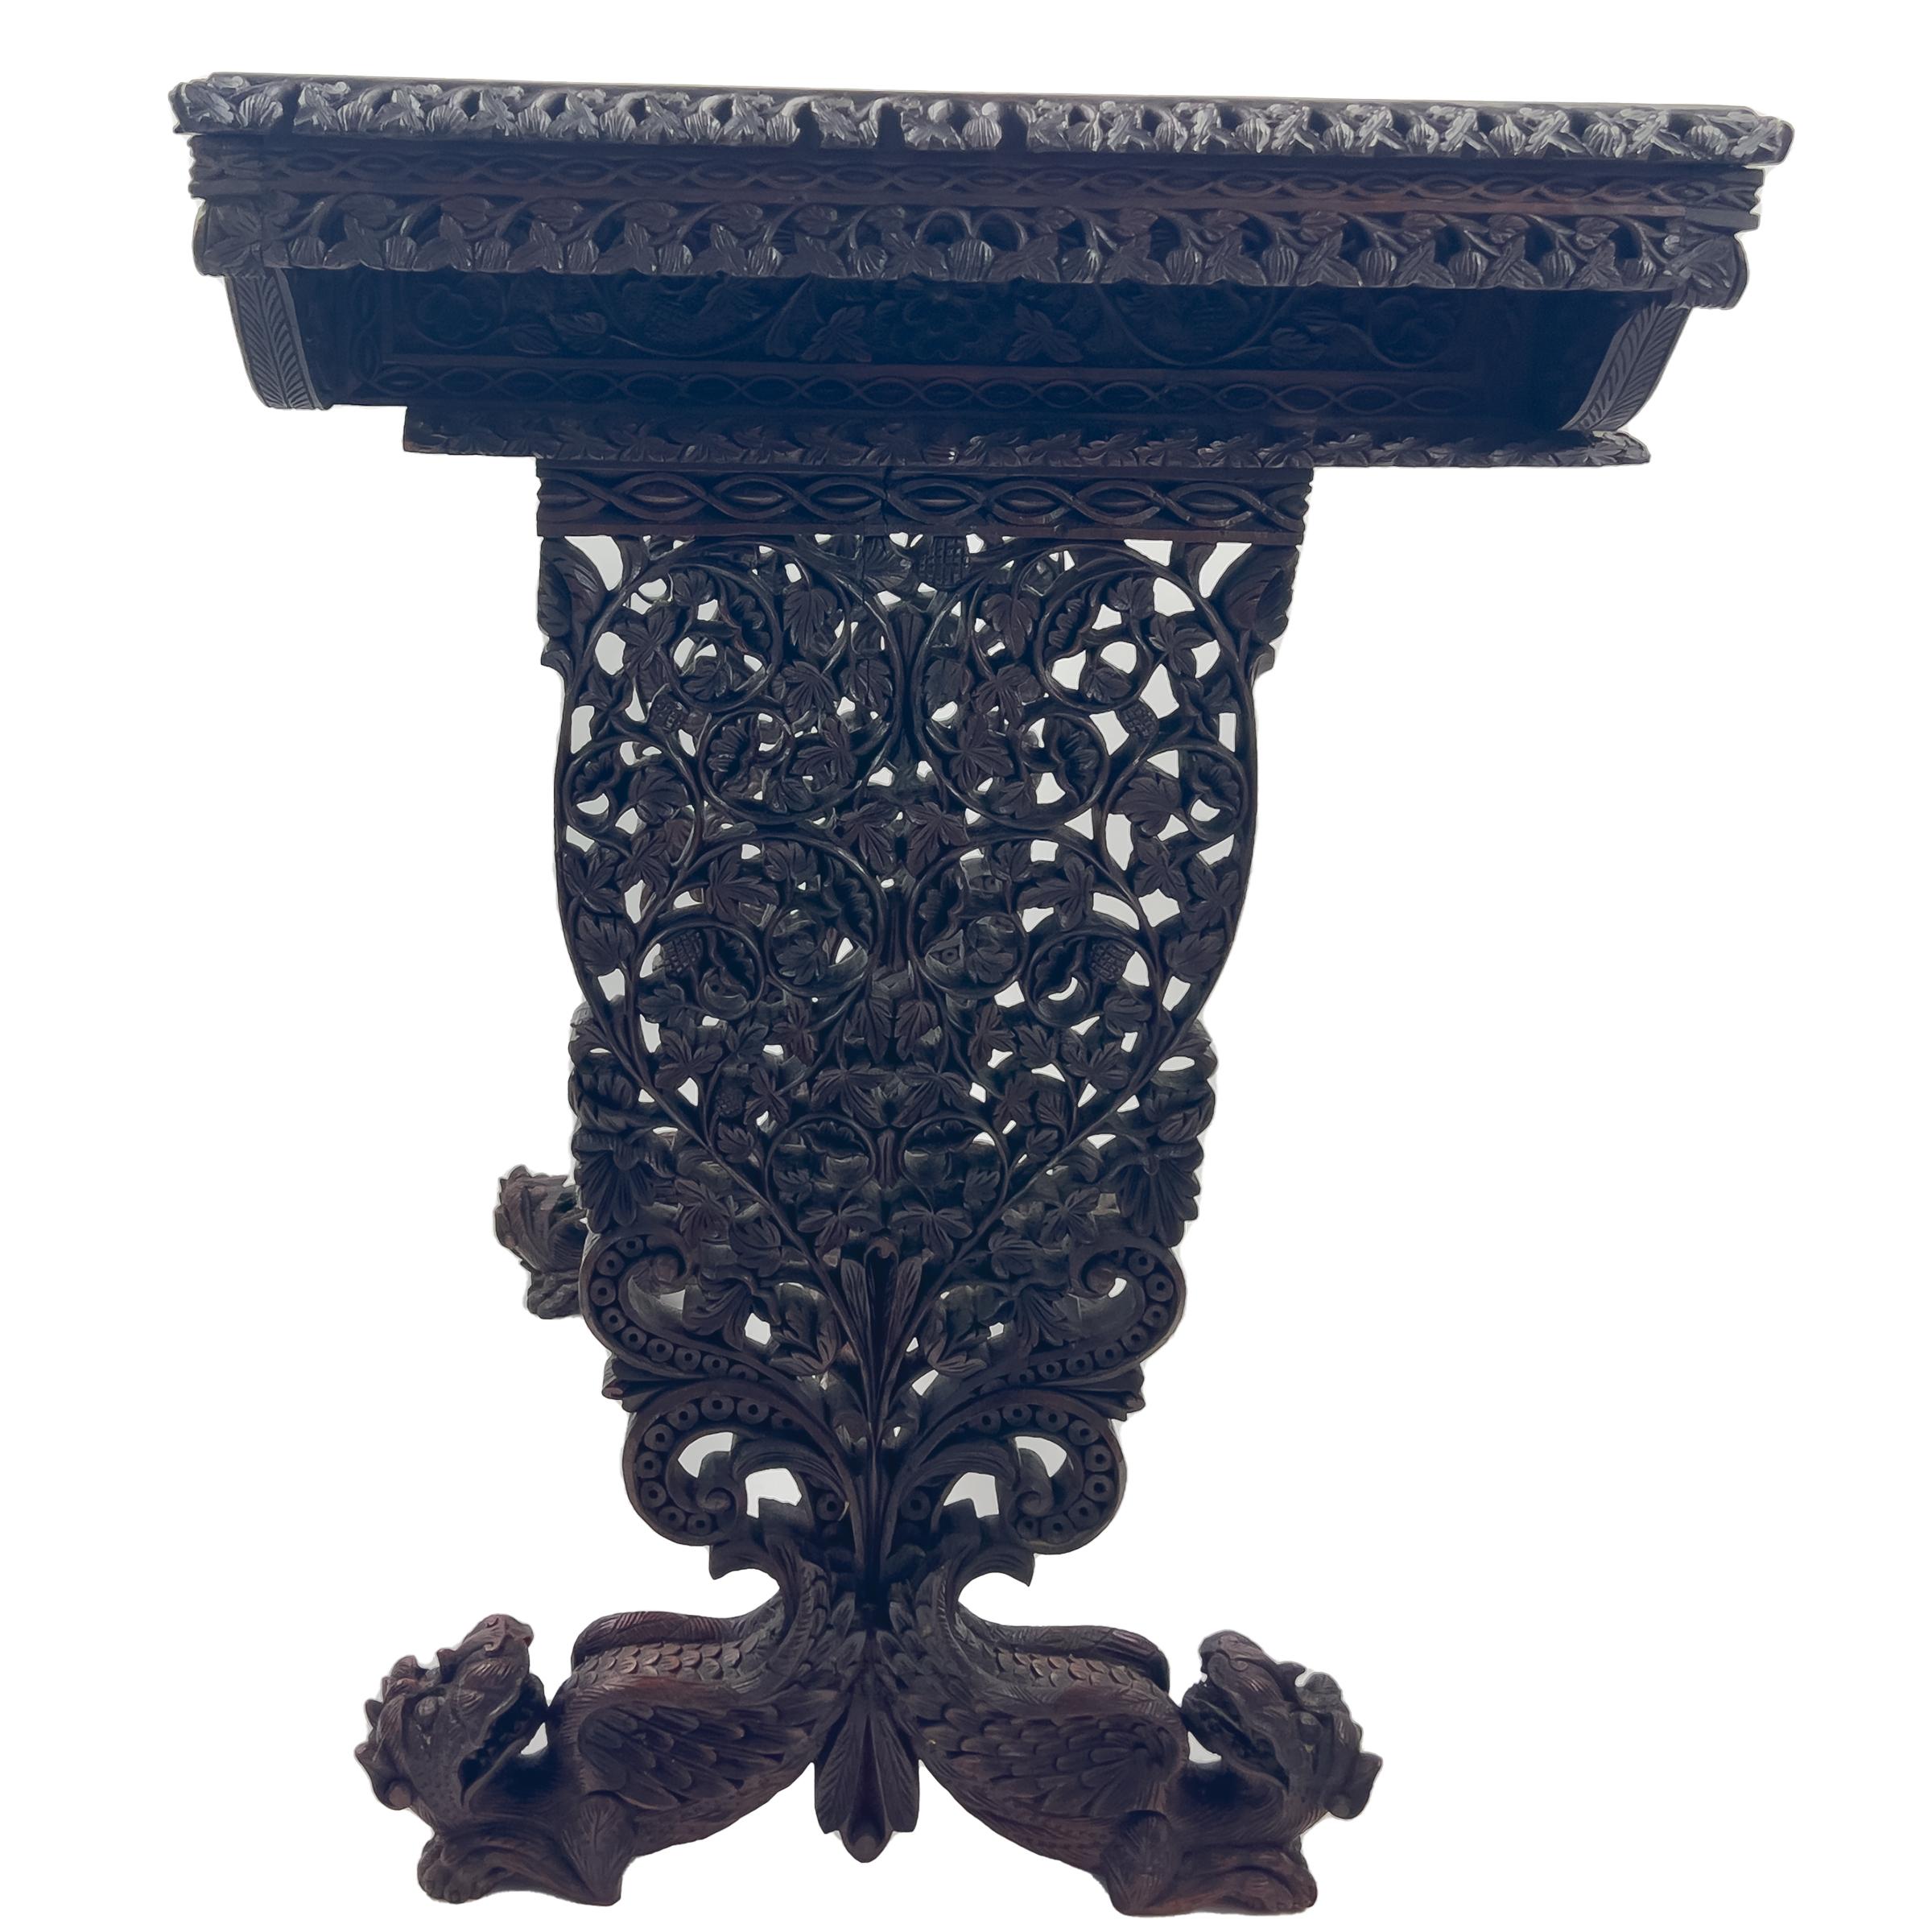 19th century anglo-Indian work table, the carved frieze with single drawer, raised on carved and pierced supports and mythical beast feet, joined by stretcher.